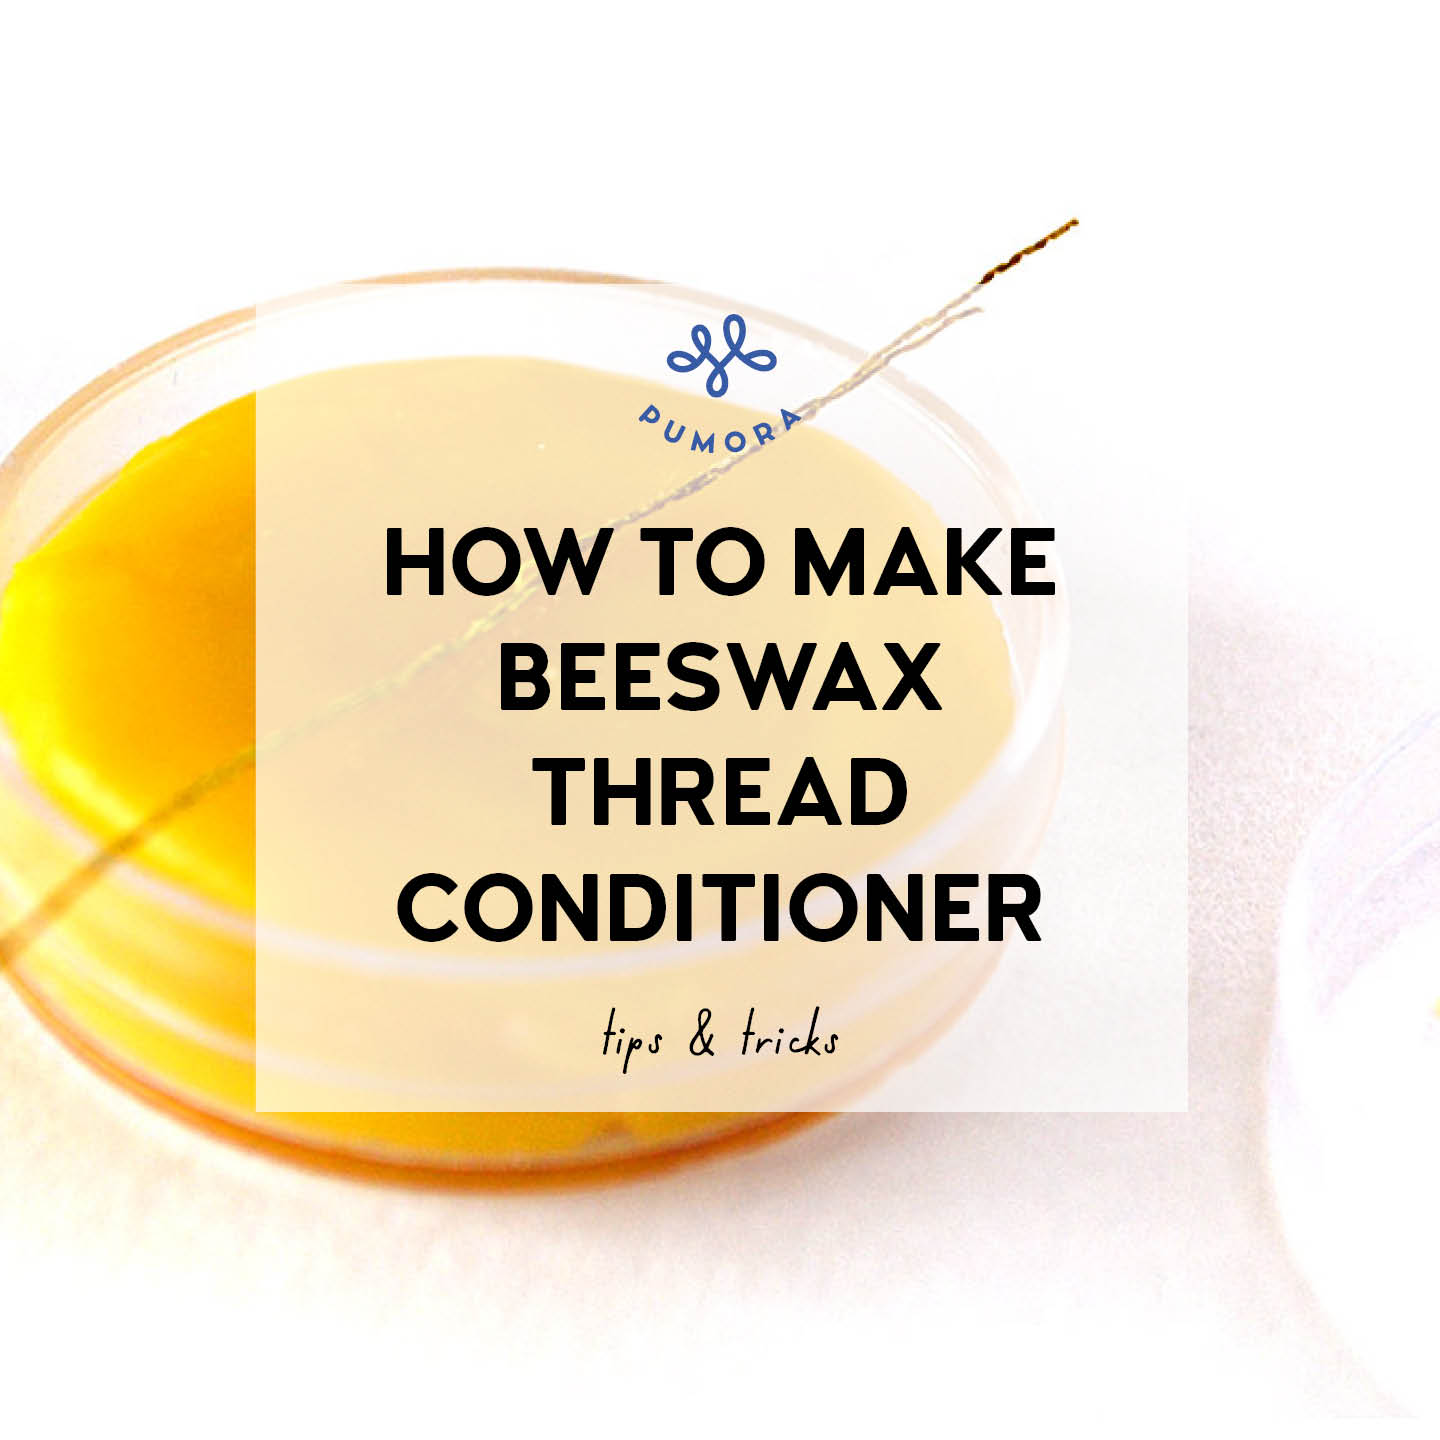 Thread Wax Thread Conditioner Beeswax for Sewing Thread Beeswax Thread Conditioner for Quilting Sewing Strengthening Line 2 Pieces 